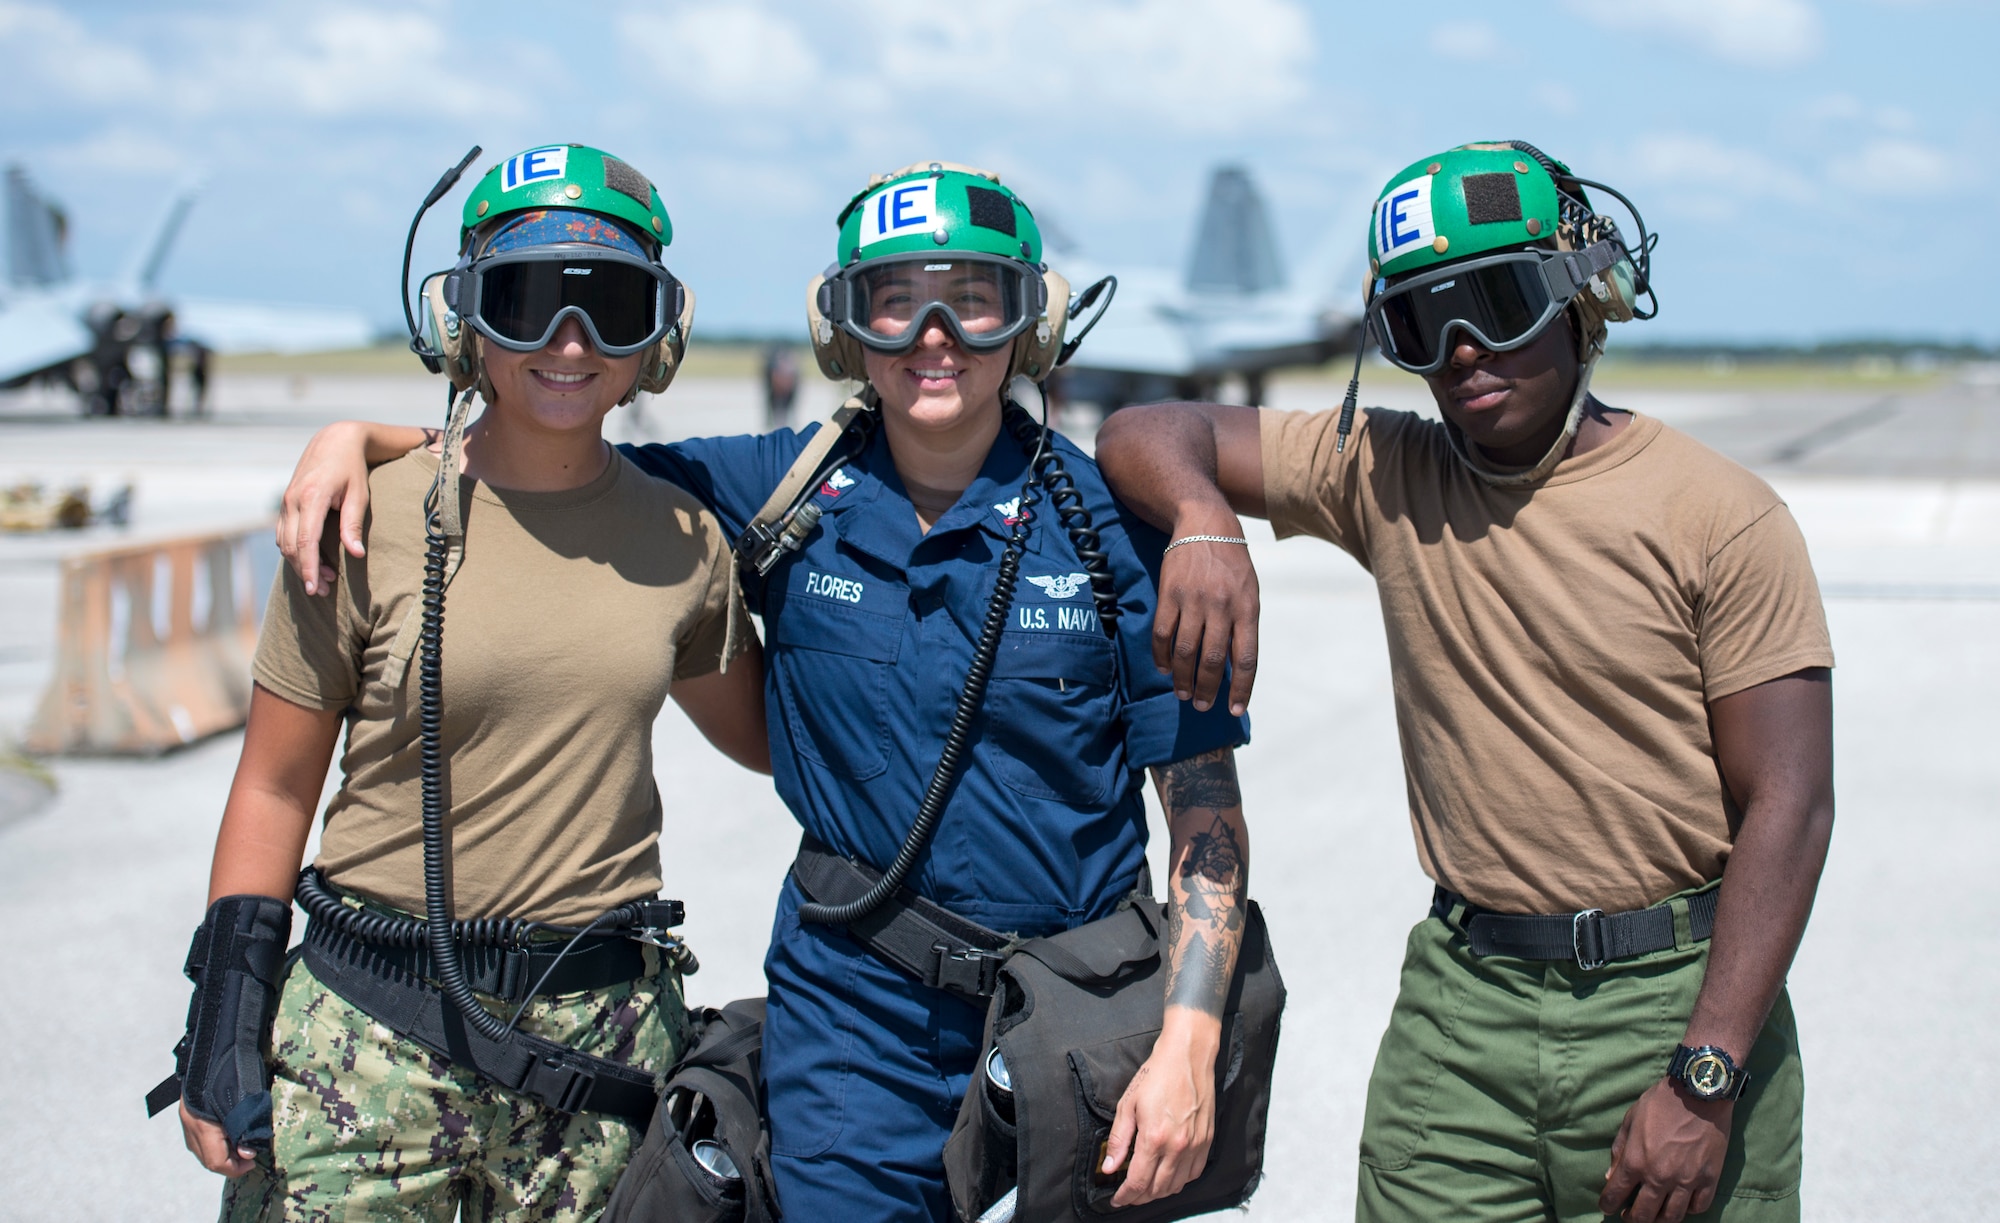 Three U.S. Navy Strike Fighter Squadron 106 aviation mechanics from Naval Air Station Oceania, Va., pause for a photo at MacDill Air Force Base, Fla., Oct. 1, 2019.